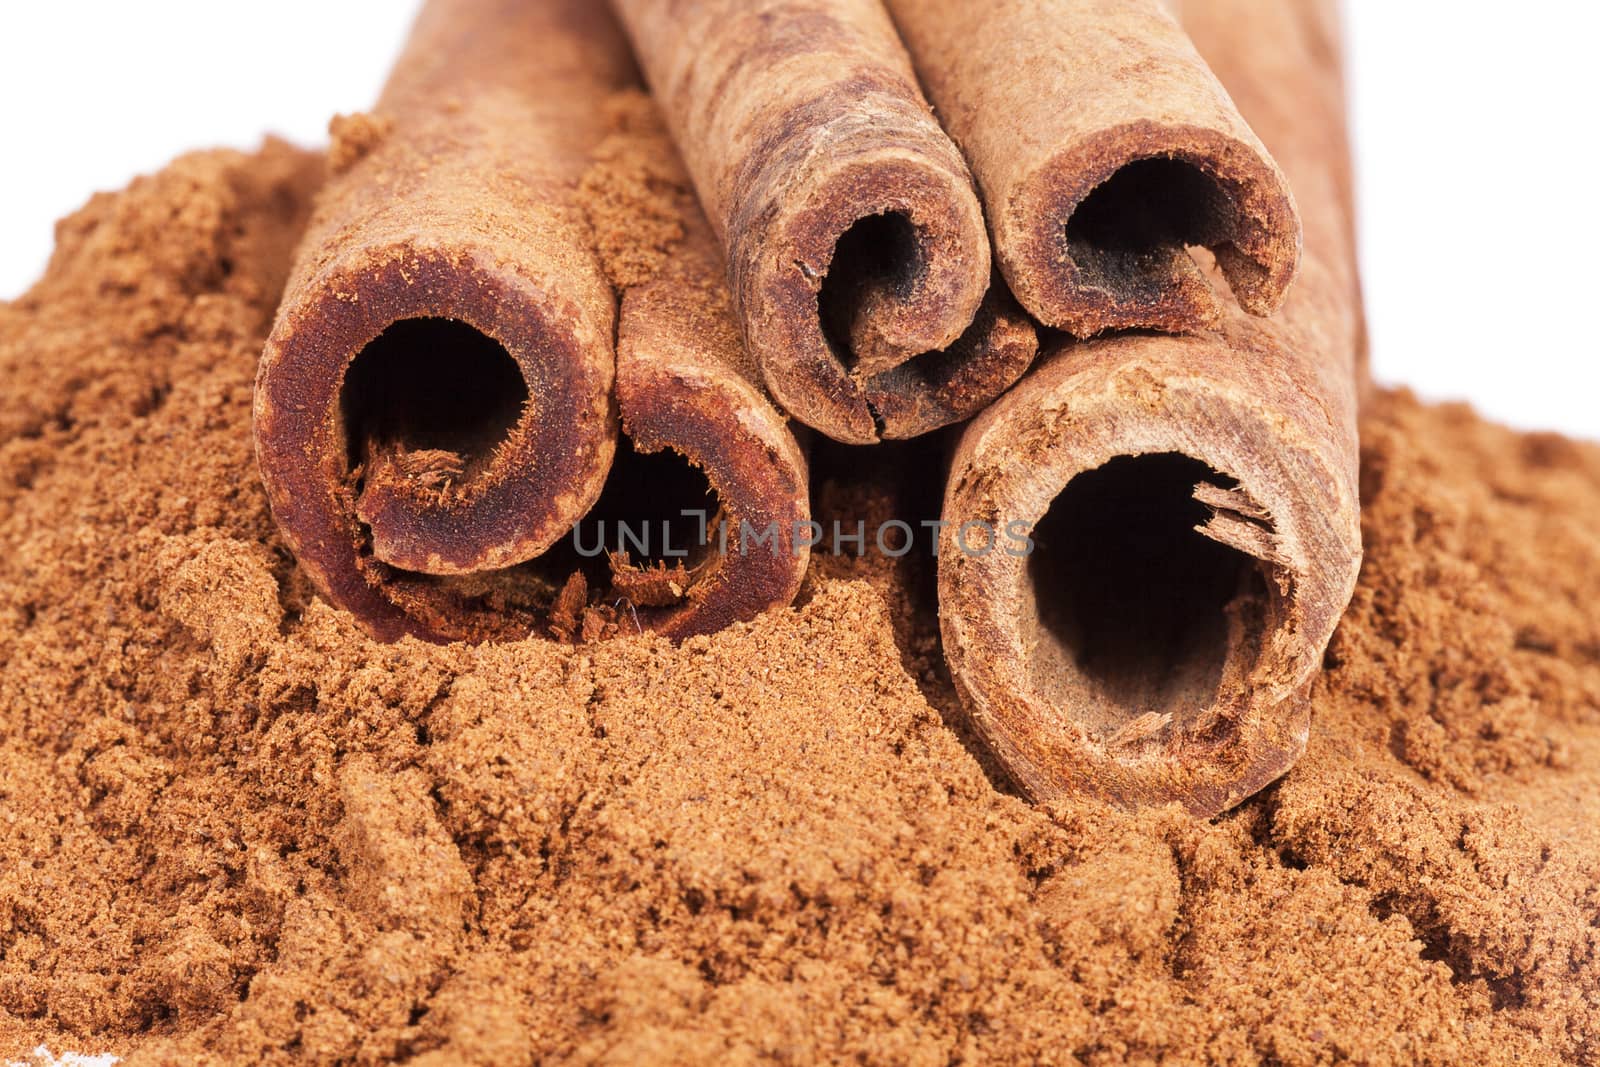 Cinnamon sticks and powder isolated on white background by mychadre77